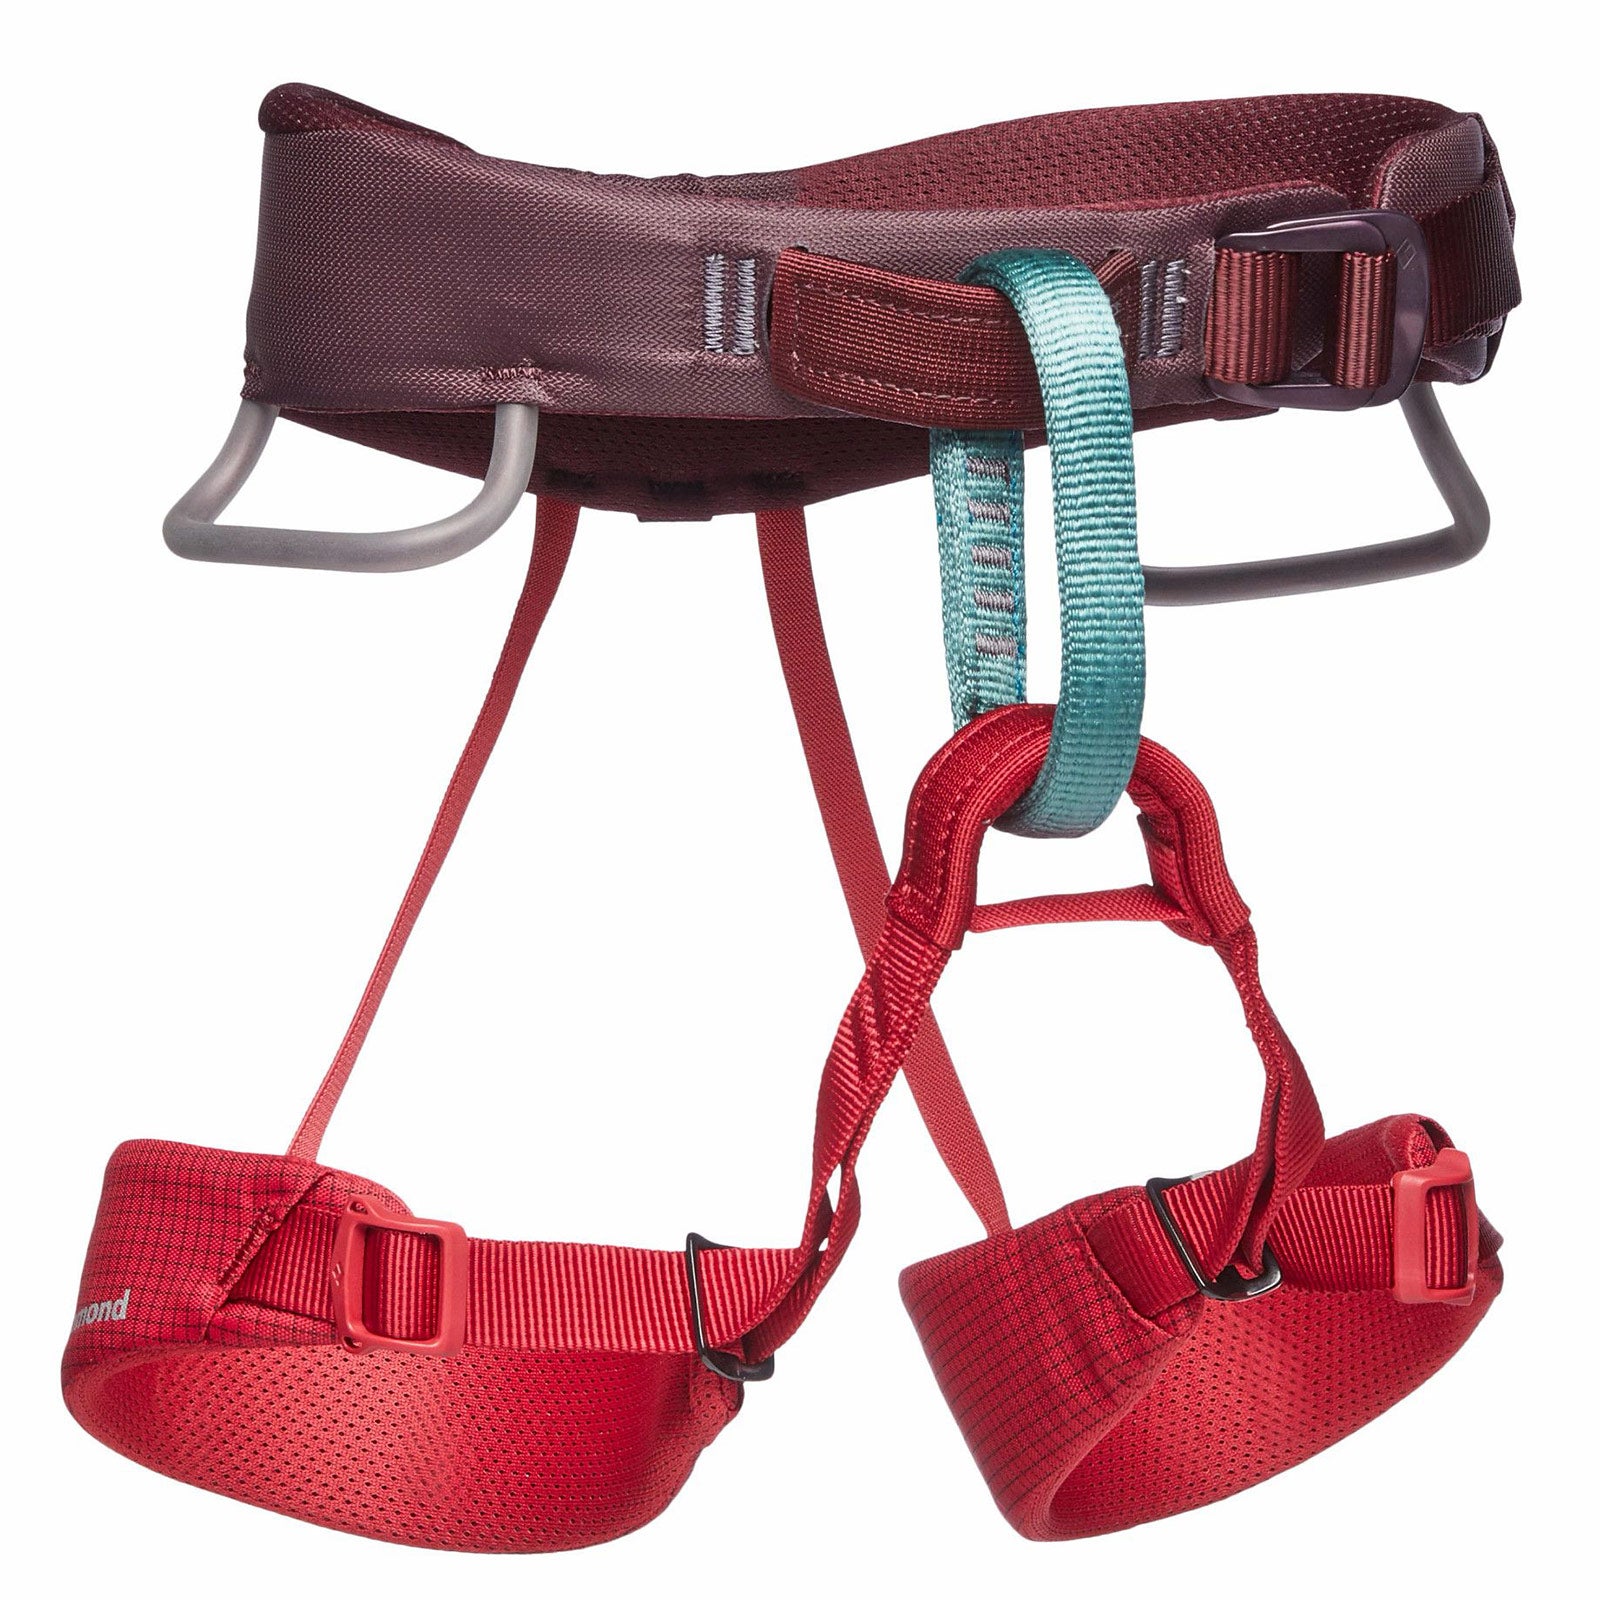 a red kid's climbing harness